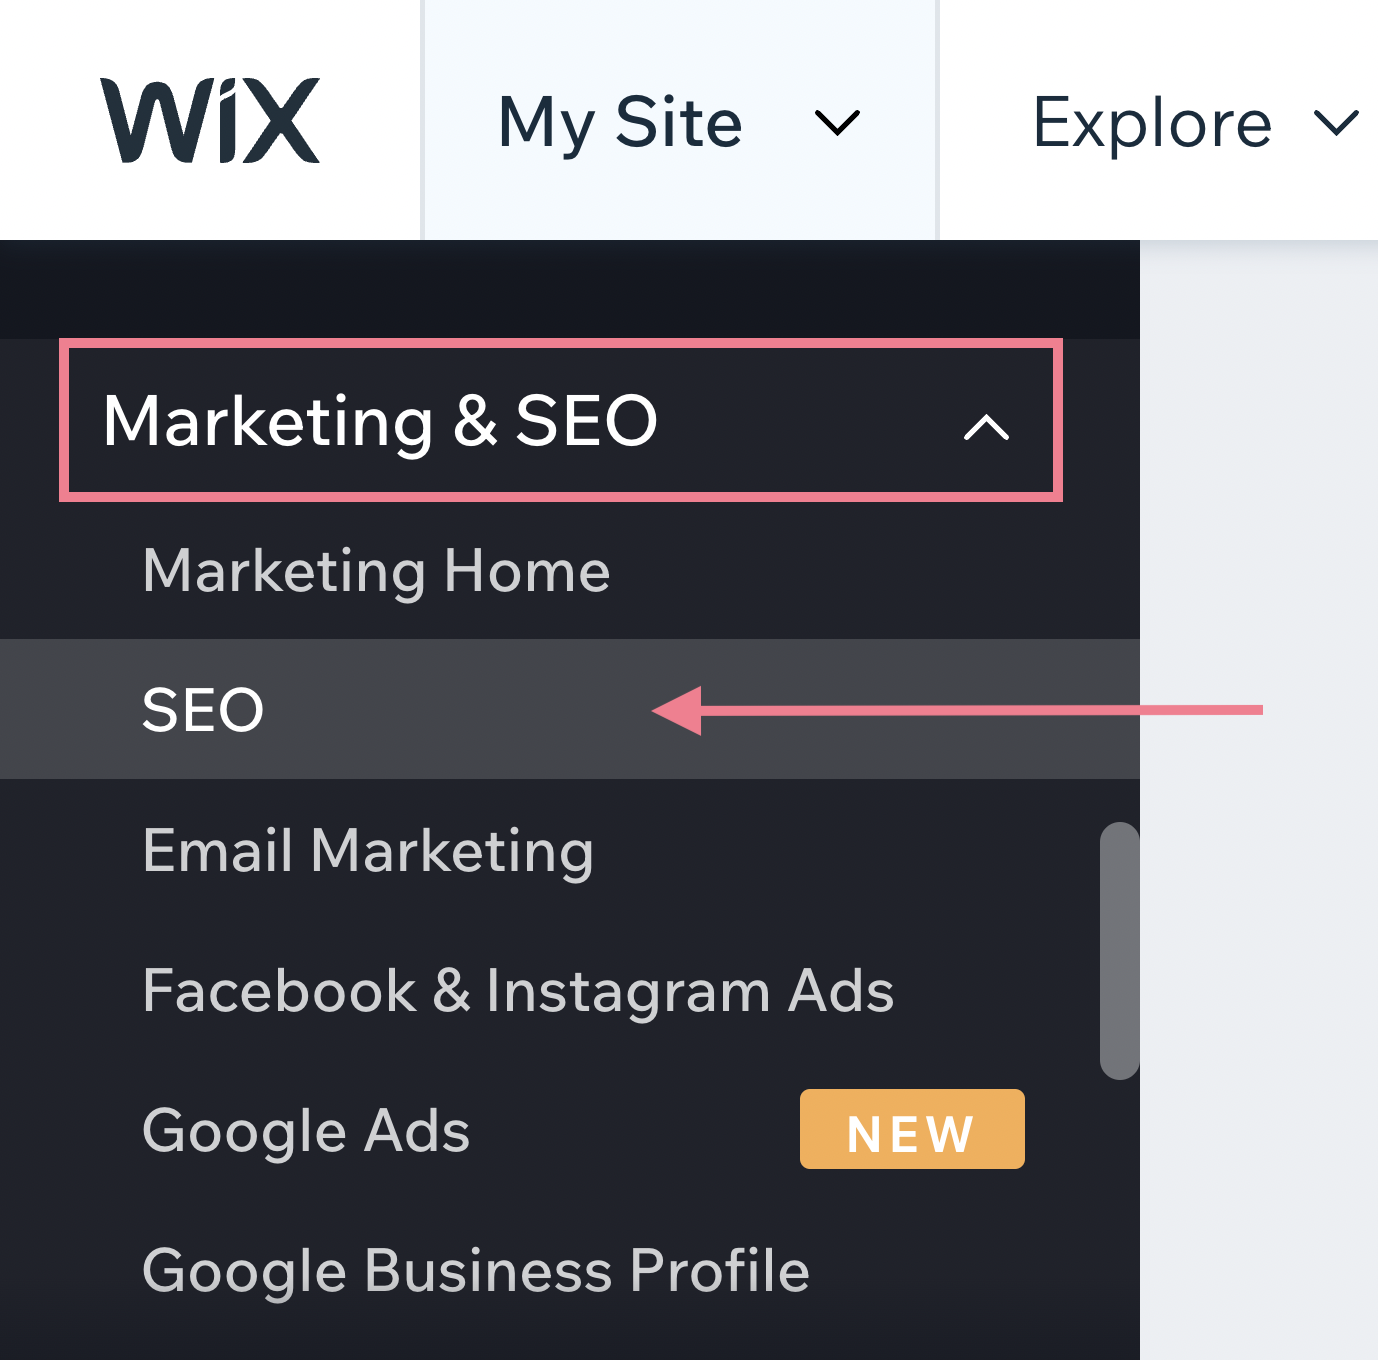 Navigate to SEO section in Wix menu